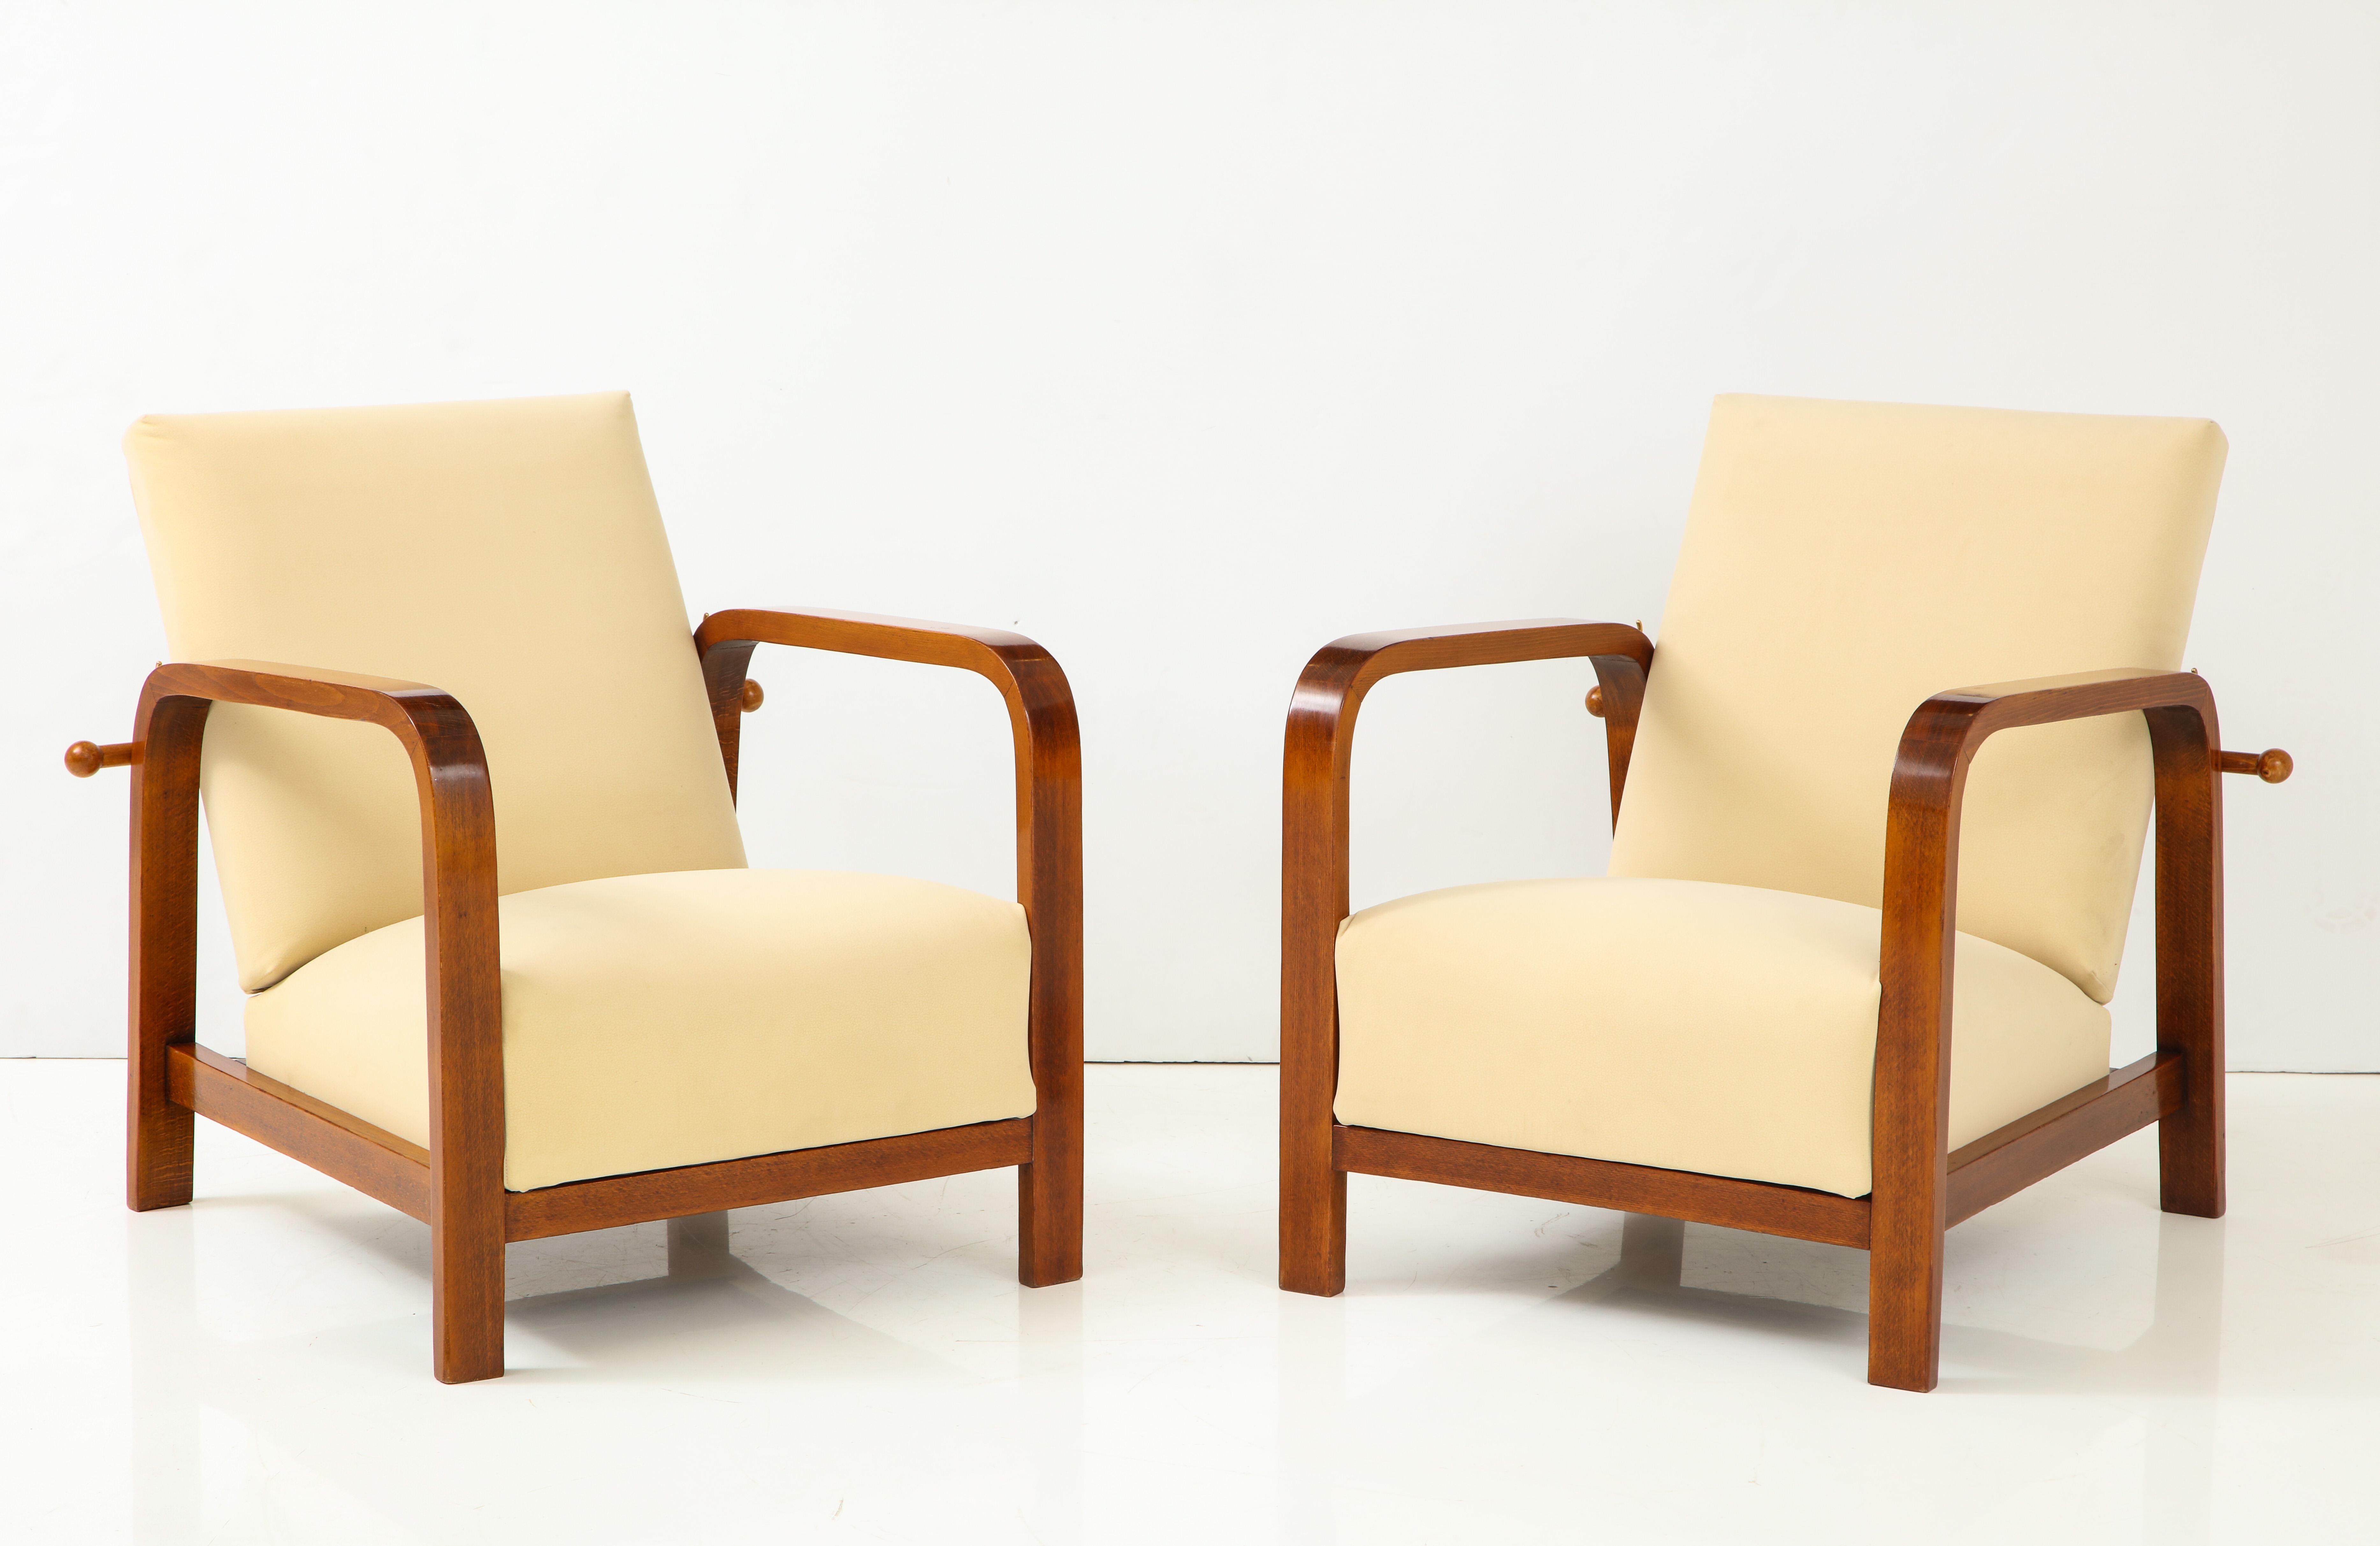 Pair of Italian 1930s palisander wood armchairs with adjustable reclining backs; the back with turned wood bar and brass fitting for reclining at three levels; newly upholstered in tan suede.
Italy, circa 1930.
Size: 15 1/2” seat height x 32 1/2”